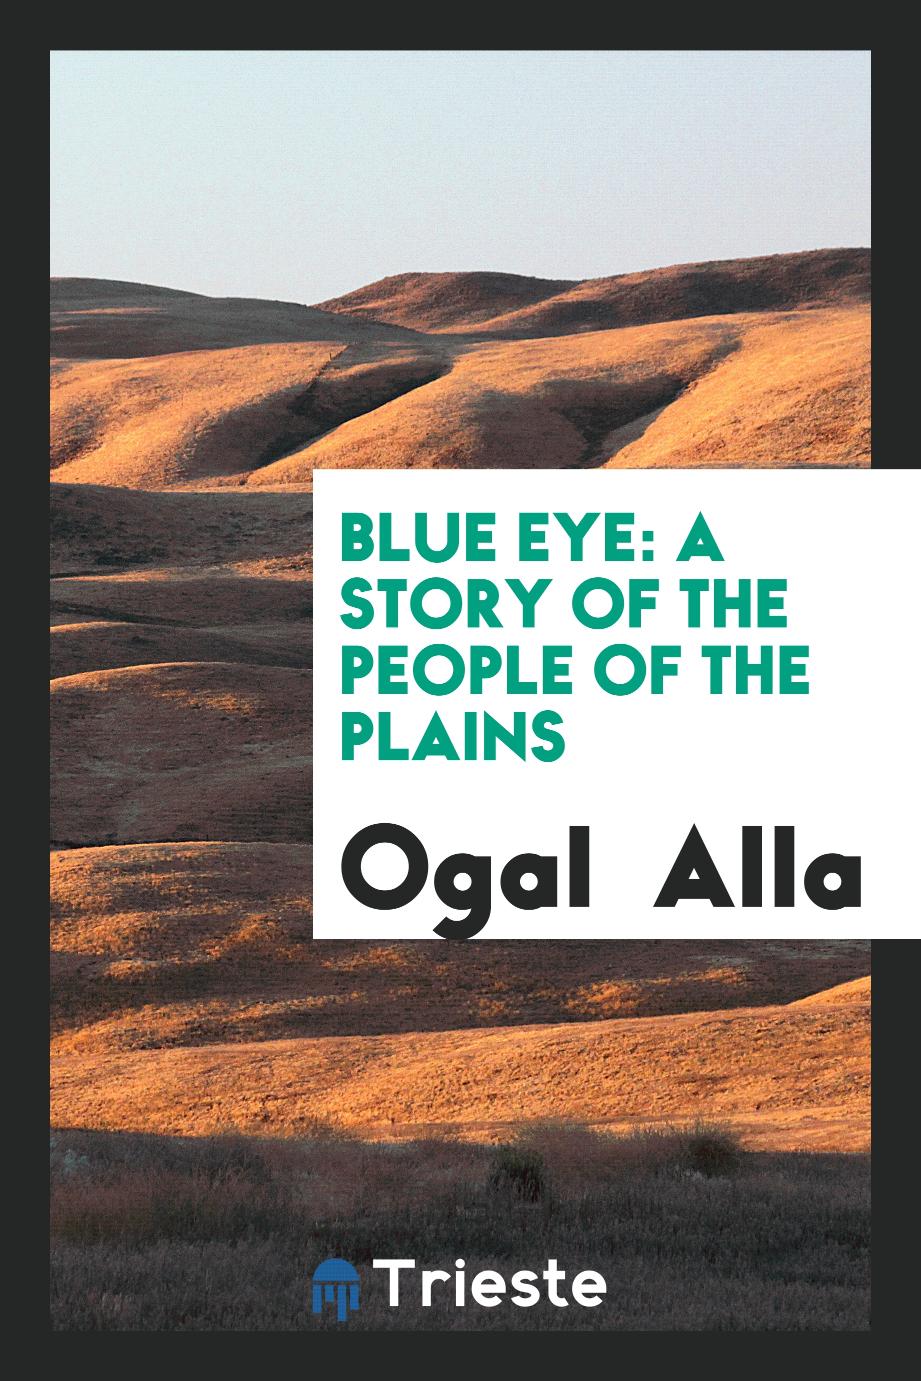 Blue Eye: a story of the people of the plains